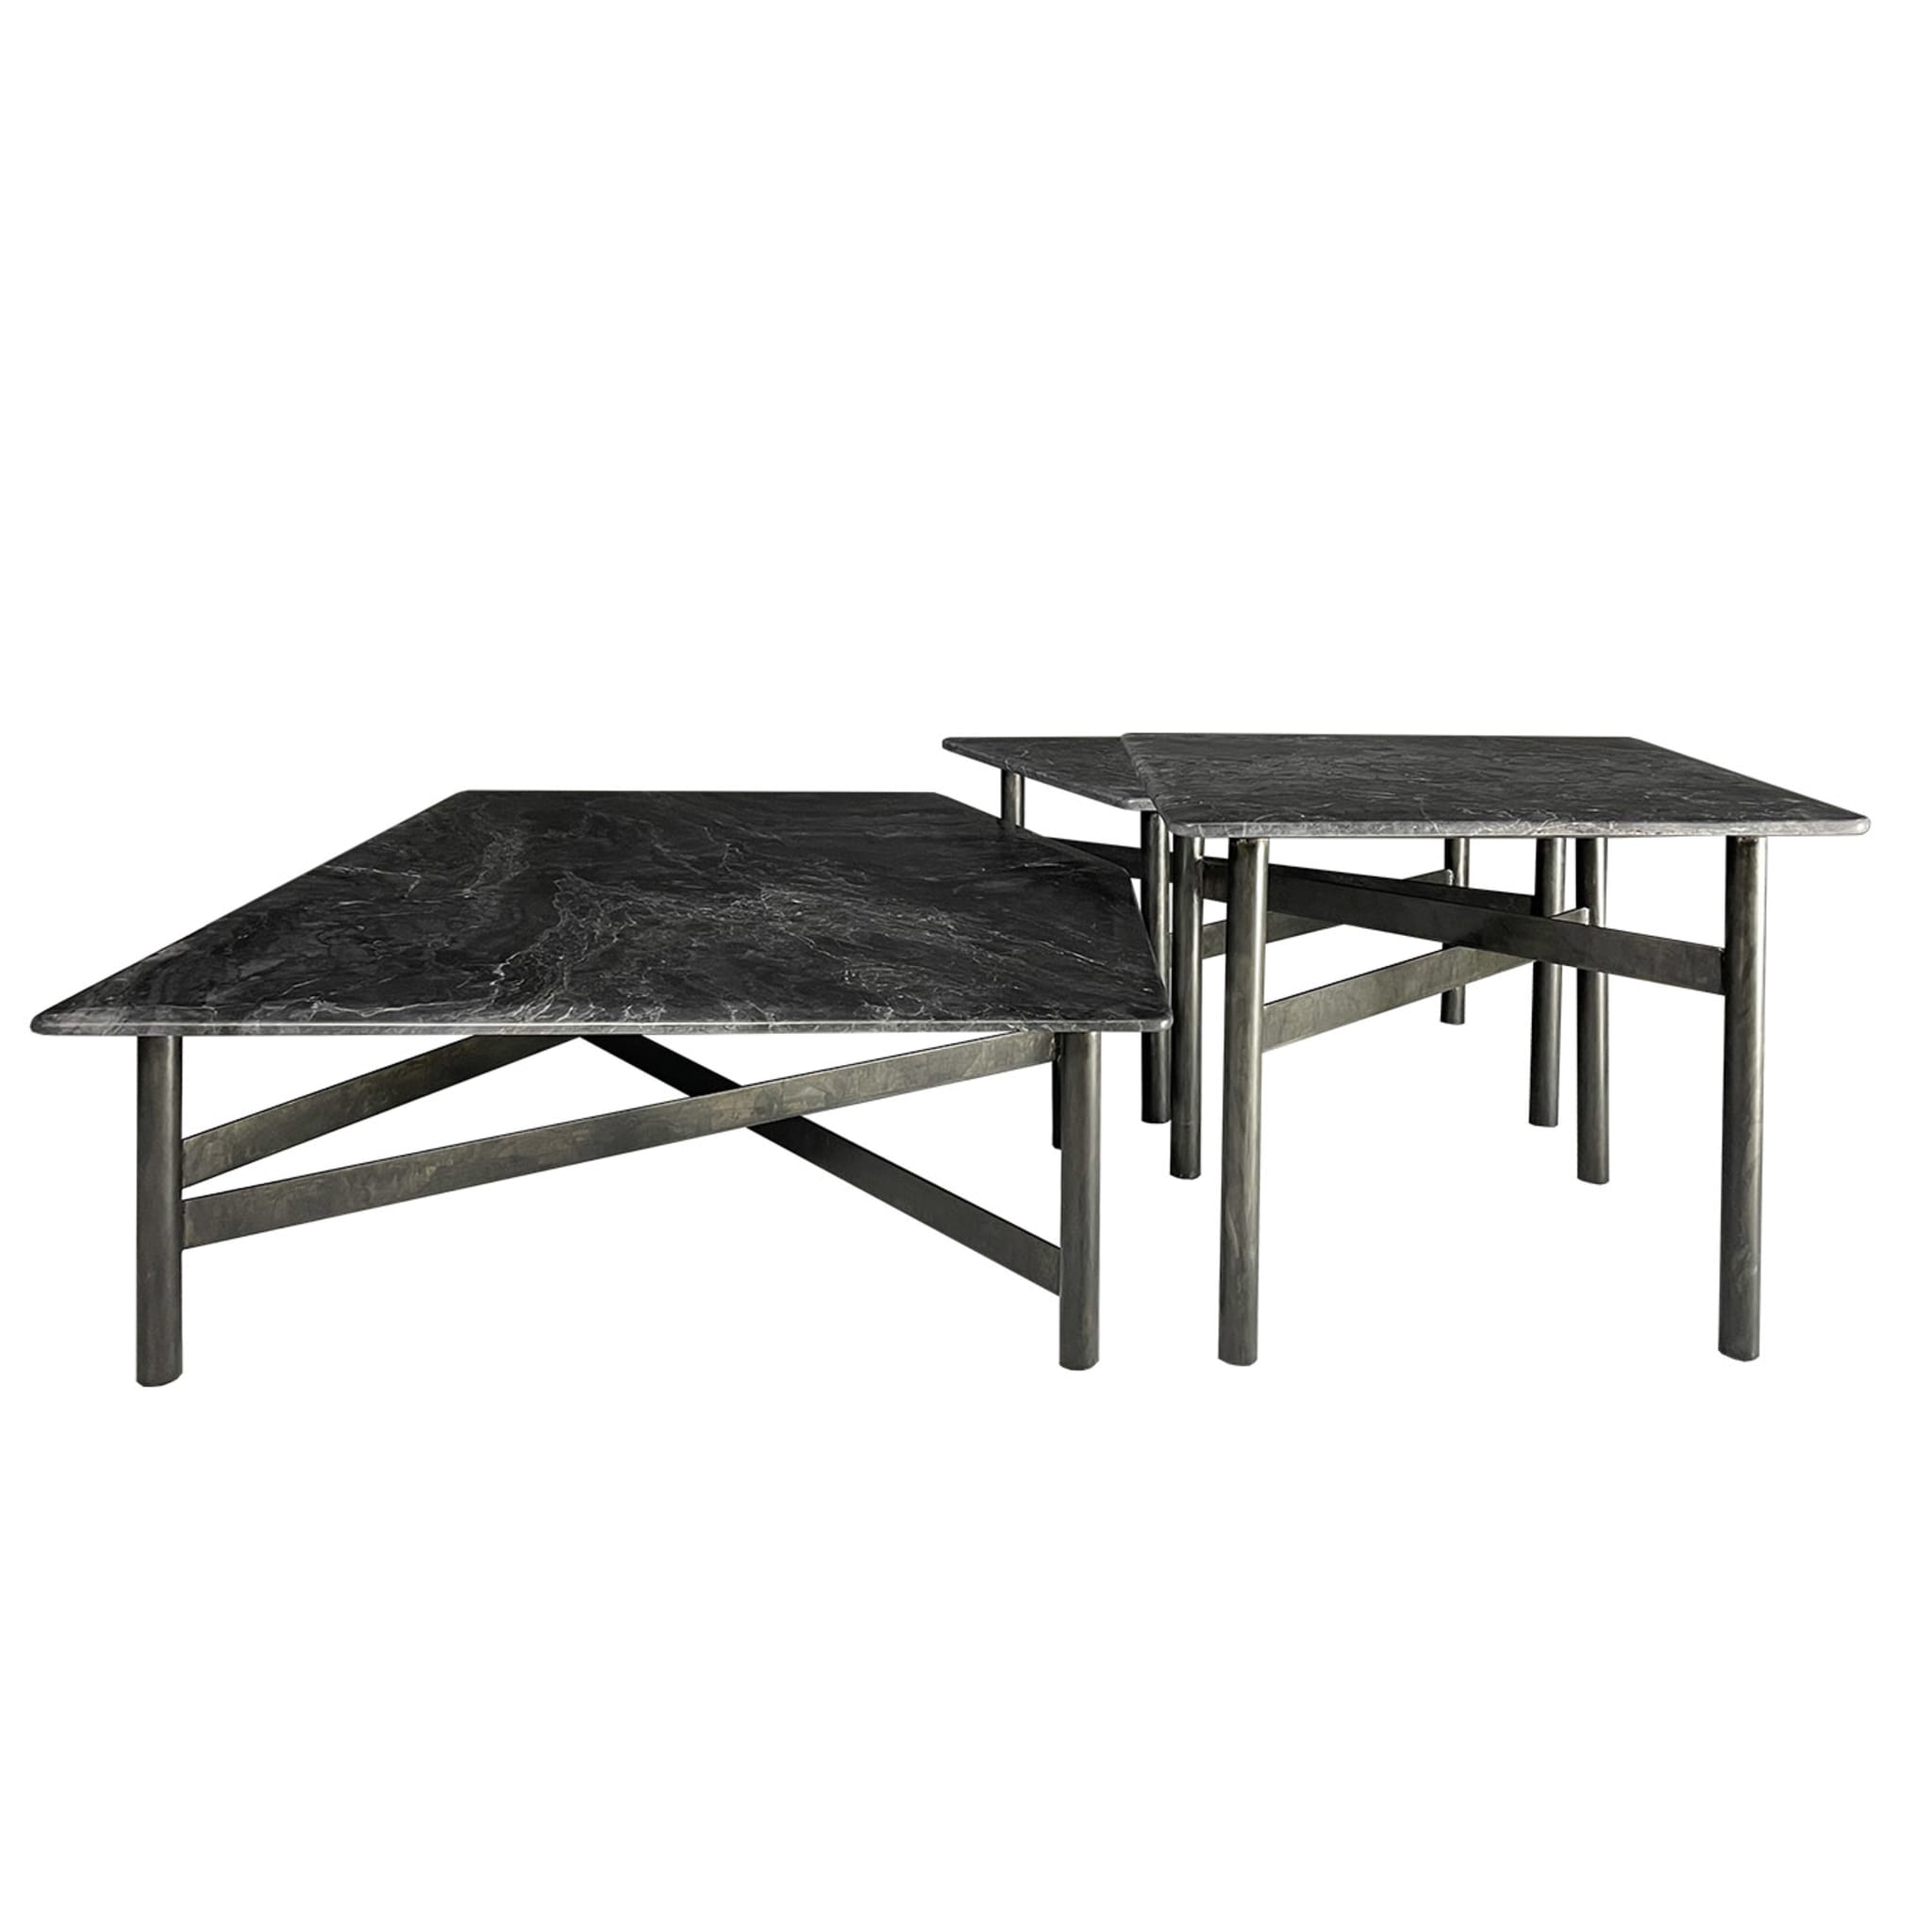 Eneolitica Twins Set of 3 Coffee Tables - Alternative view 1